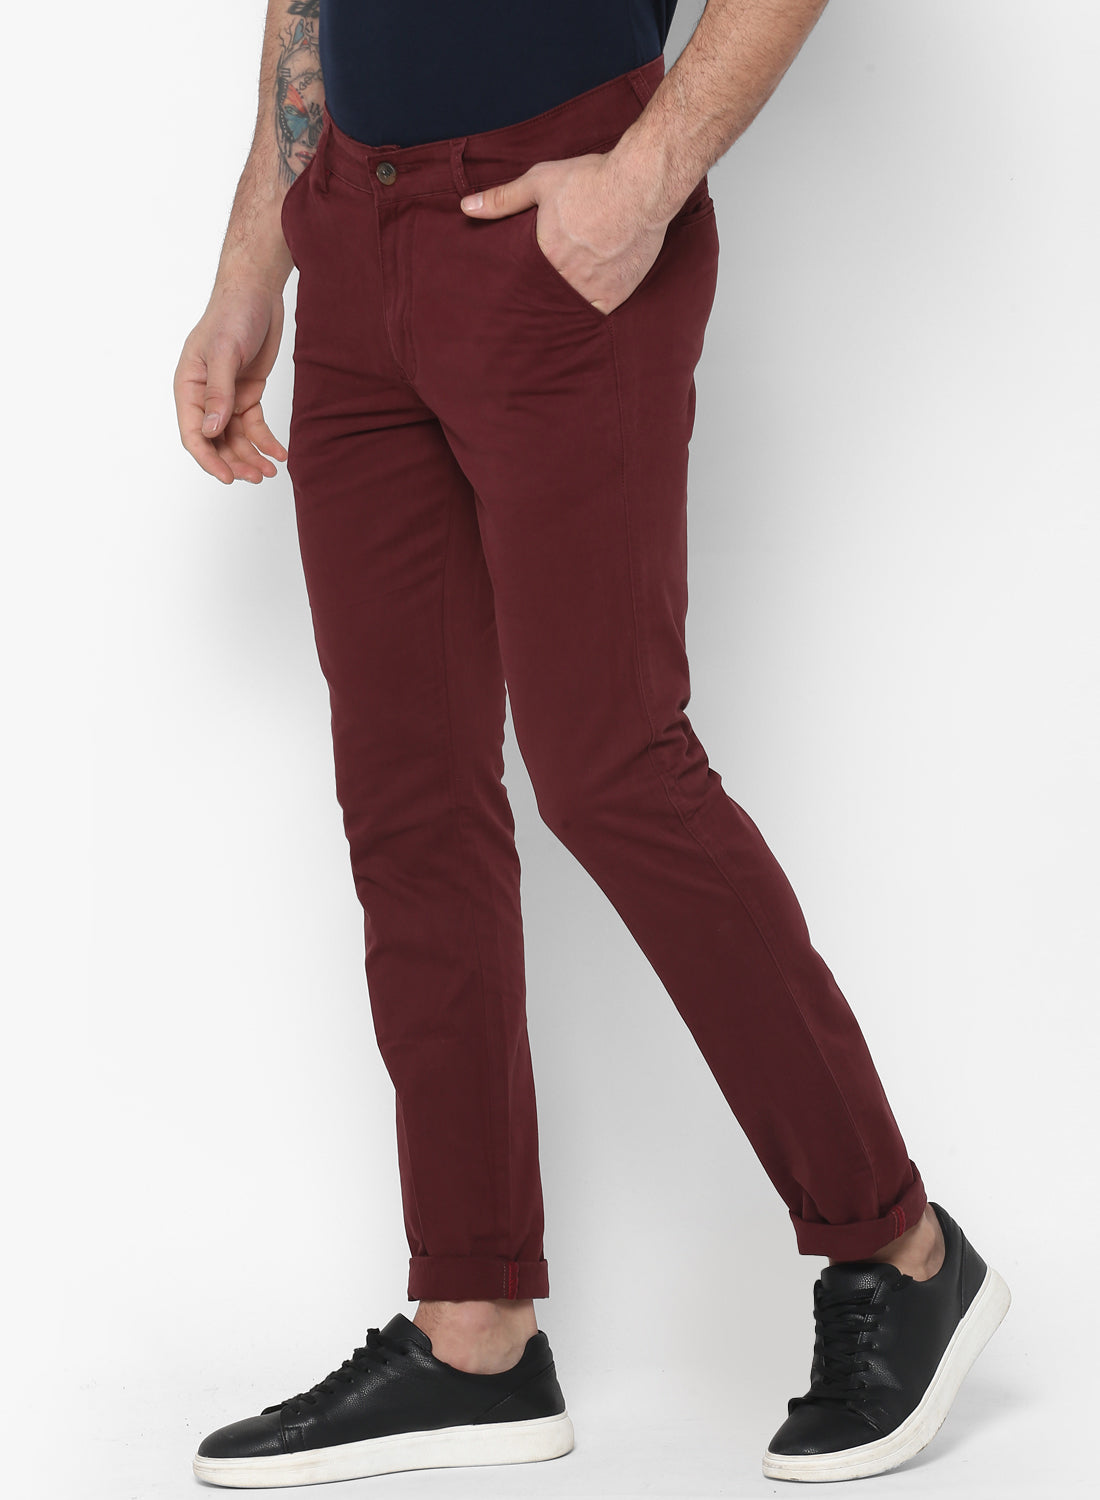 Men's Maroon Cotton Slim Fit Casual Chinos Trousers Stretch